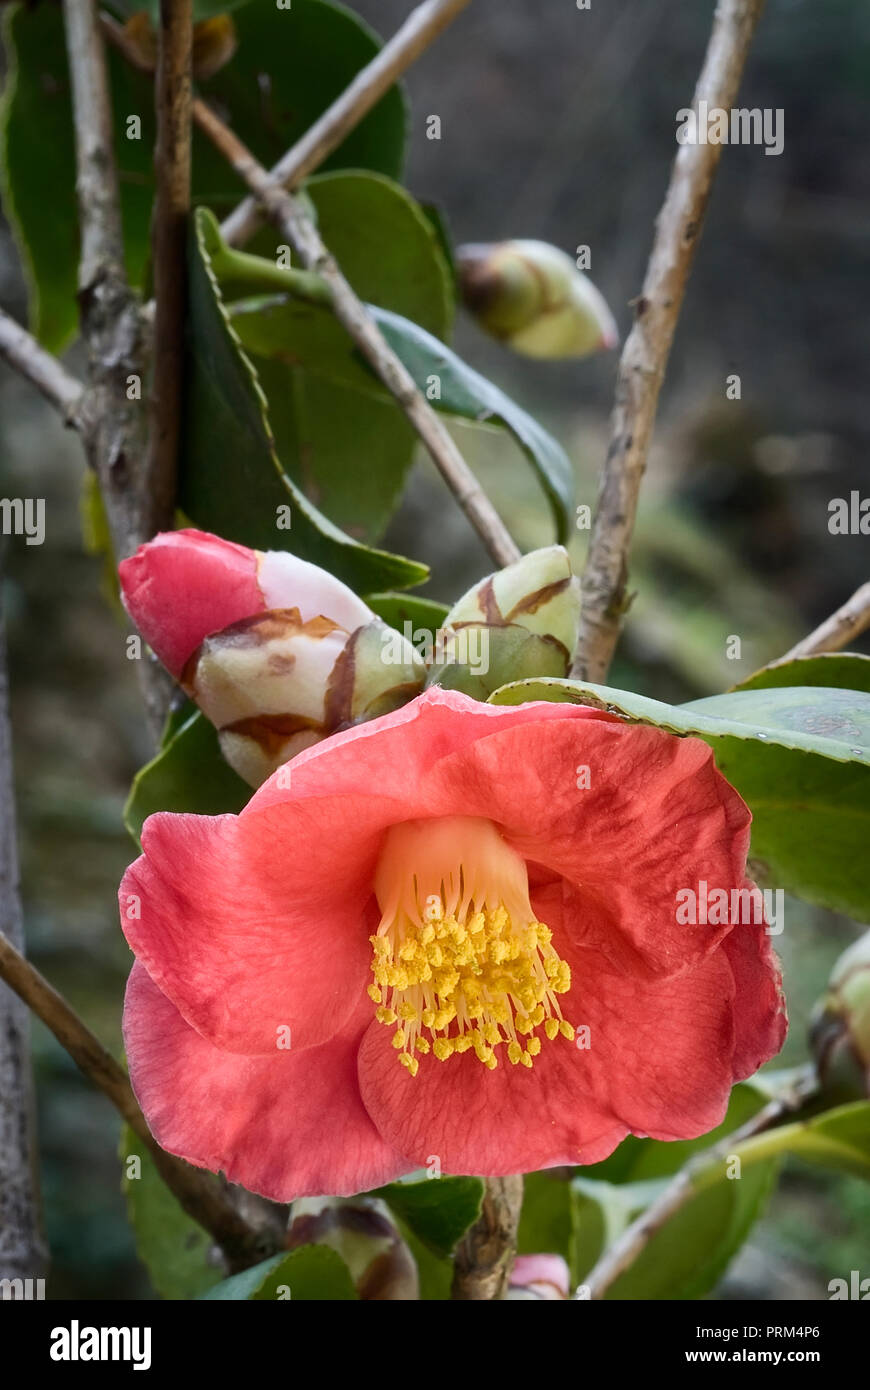 Camellia soulangiana (Camellia japonica cv. soulangiana, Theaceae), evergreen shurb, simple flowers, red blosson Stock Photo